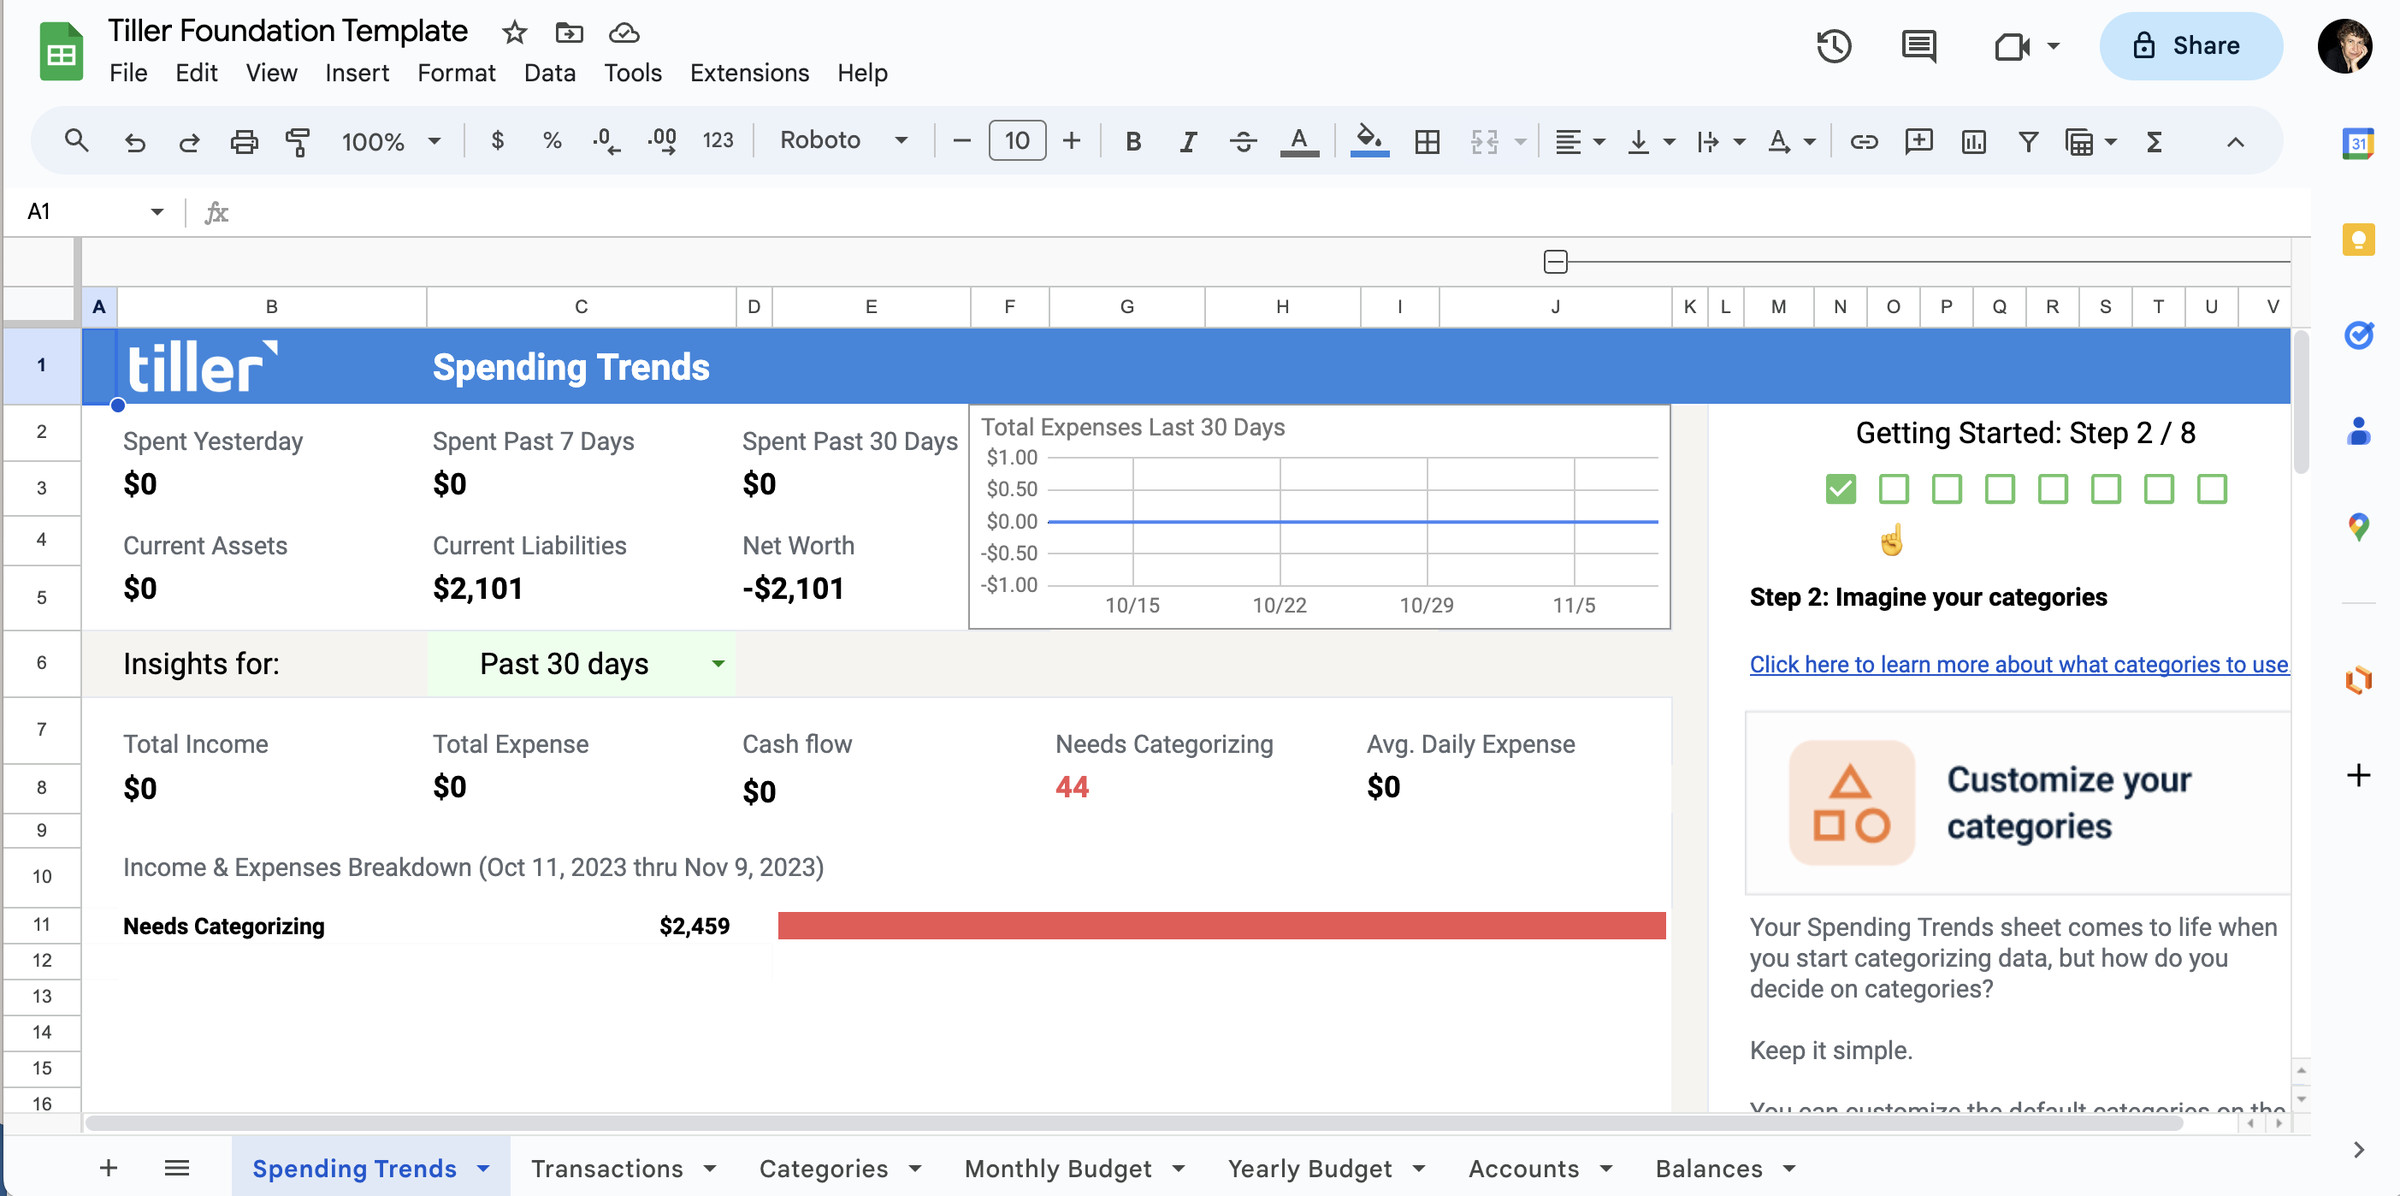 Google Sheets spreadsheet with Tiller Foundation Template on top of page, Tiller Spending Trends on top of spreadsheet, and various headings such as “Spent Yesterday” and “Spent Past 7 Days” beneath it.